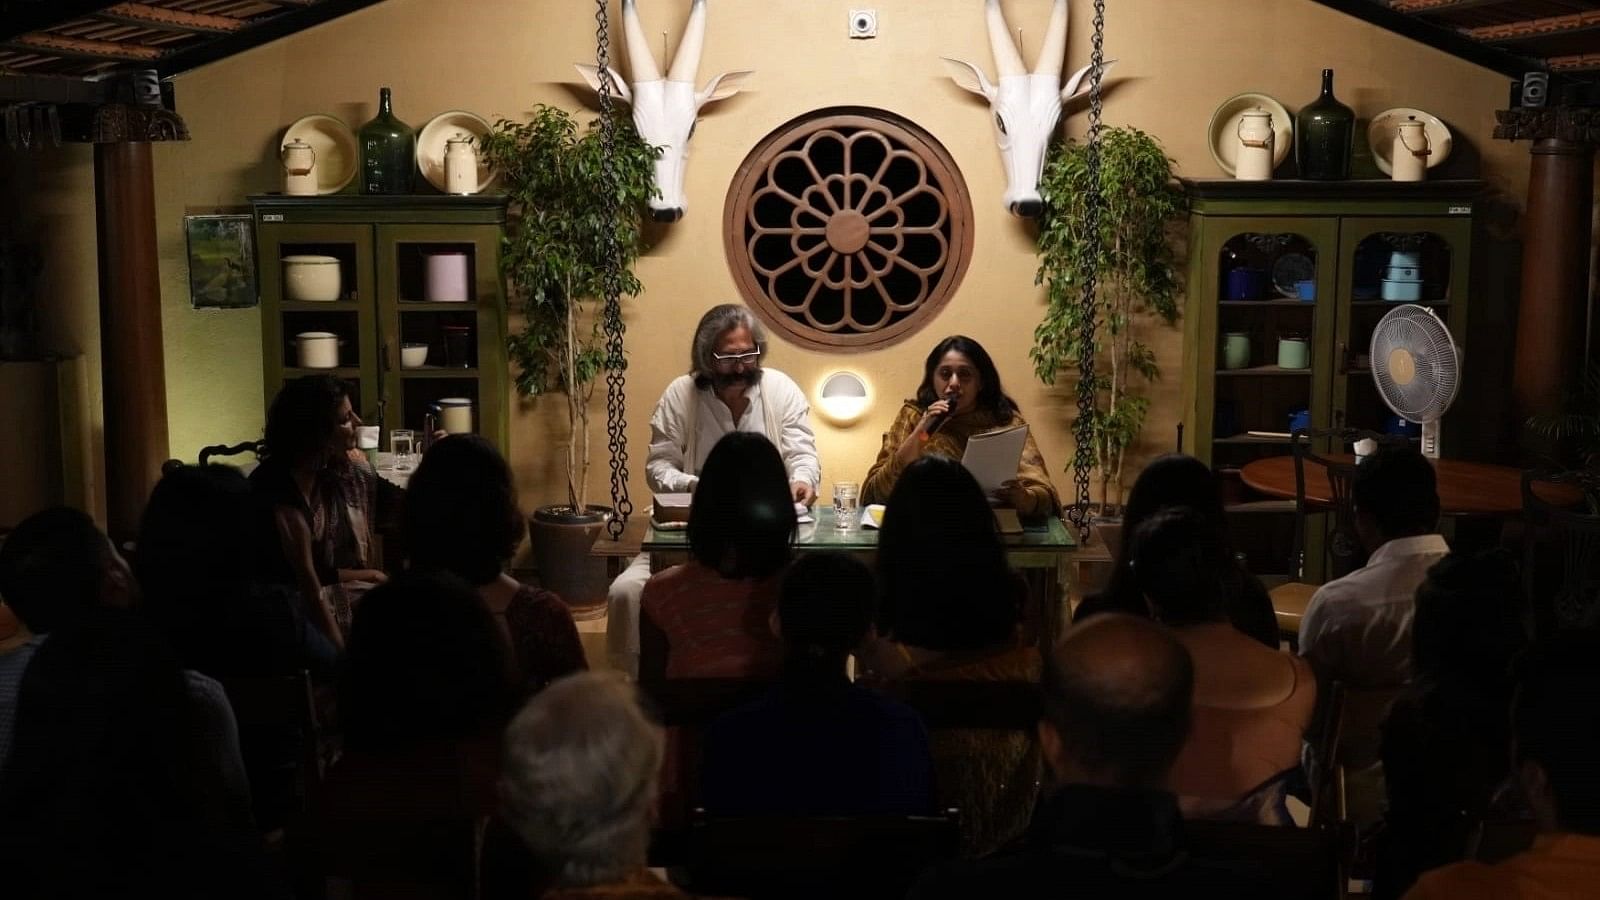 Kyoumars Freeman and Shaista Yacoob recite Rumi’s verses in Persian and English respectivley. The reading was held at a cafe in Langford Town recently.